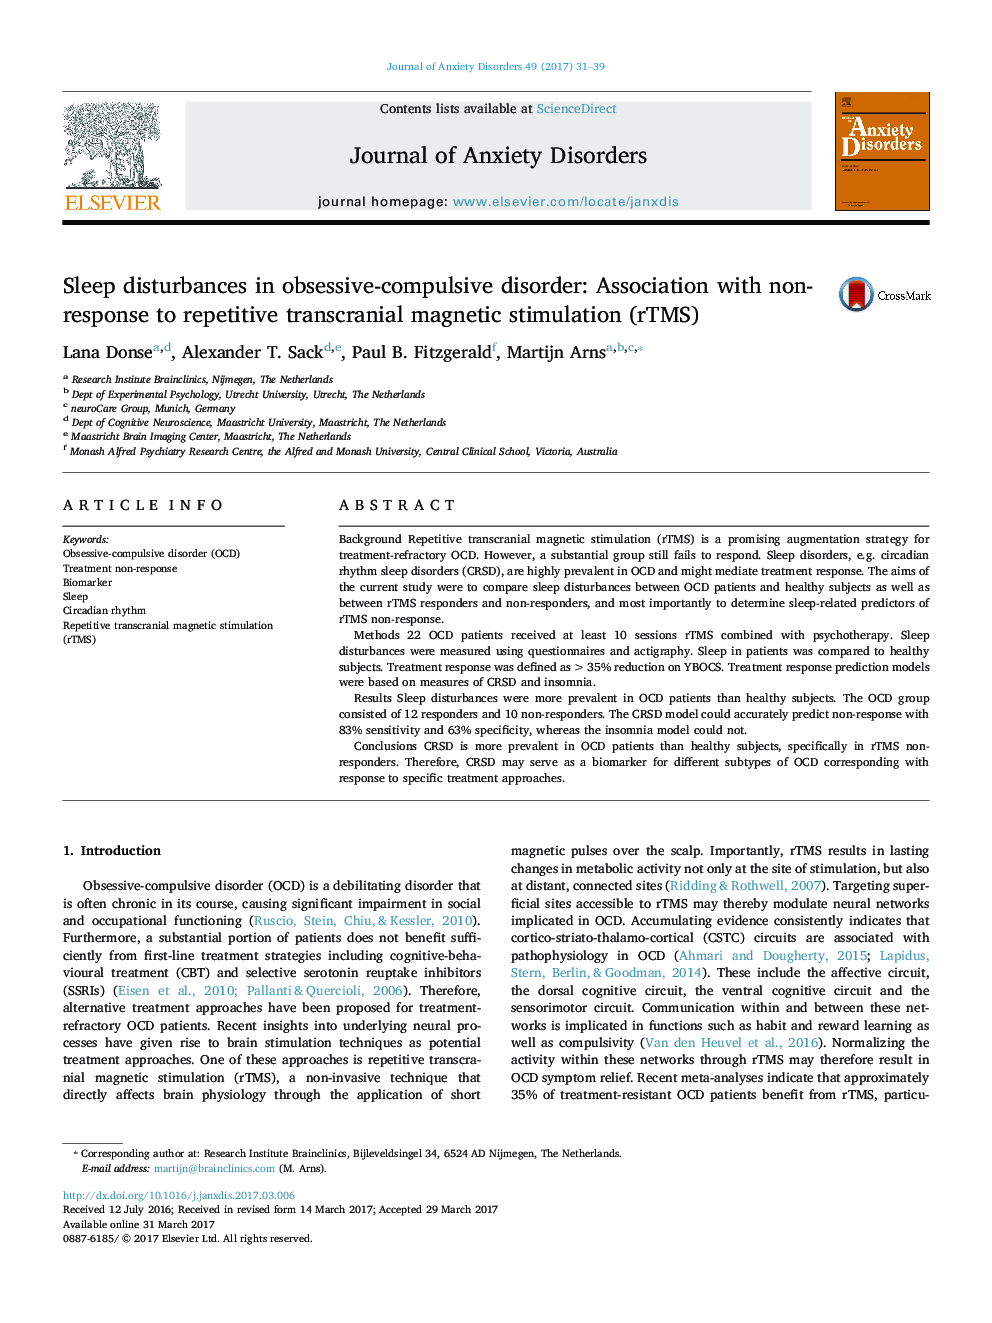 Sleep disturbances in obsessive-compulsive disorder: Association with non-response to repetitive transcranial magnetic stimulation (rTMS)